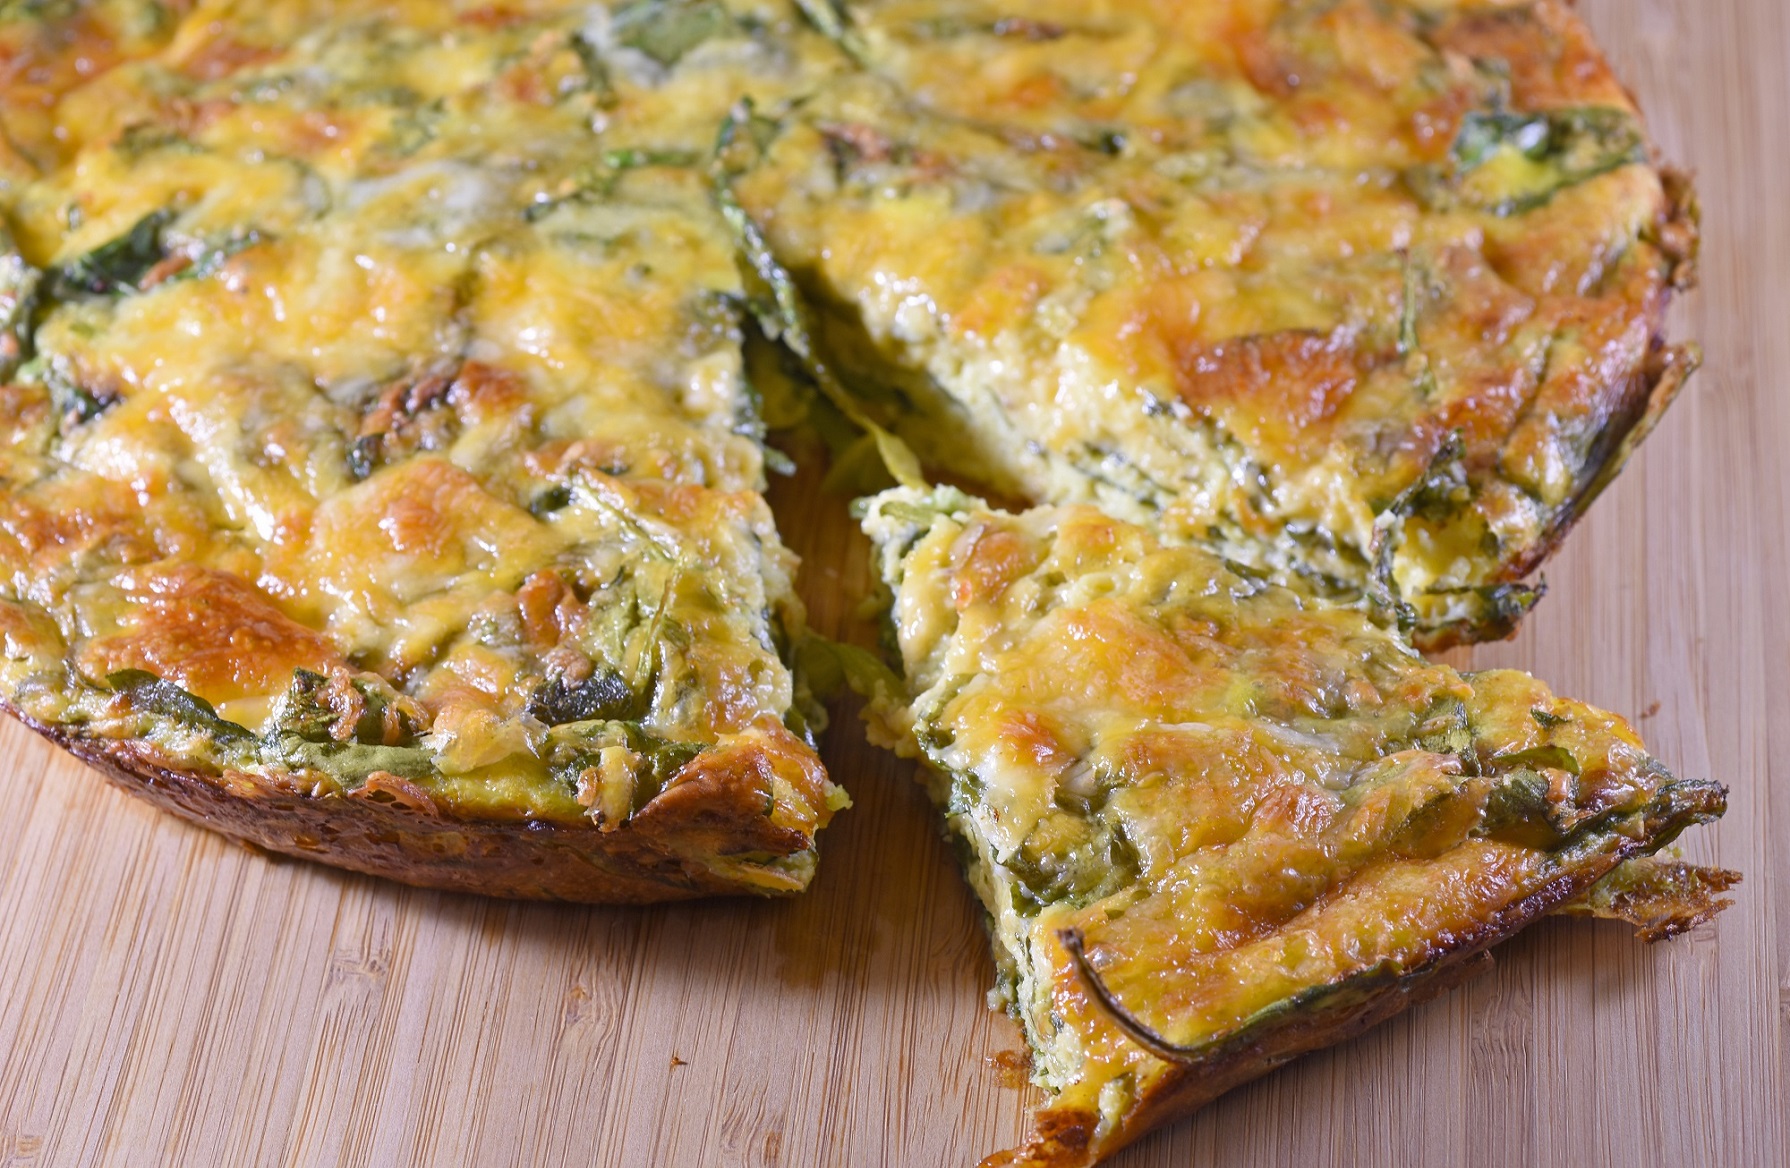 Recipe of the Day: Impossibly Easy Quiche